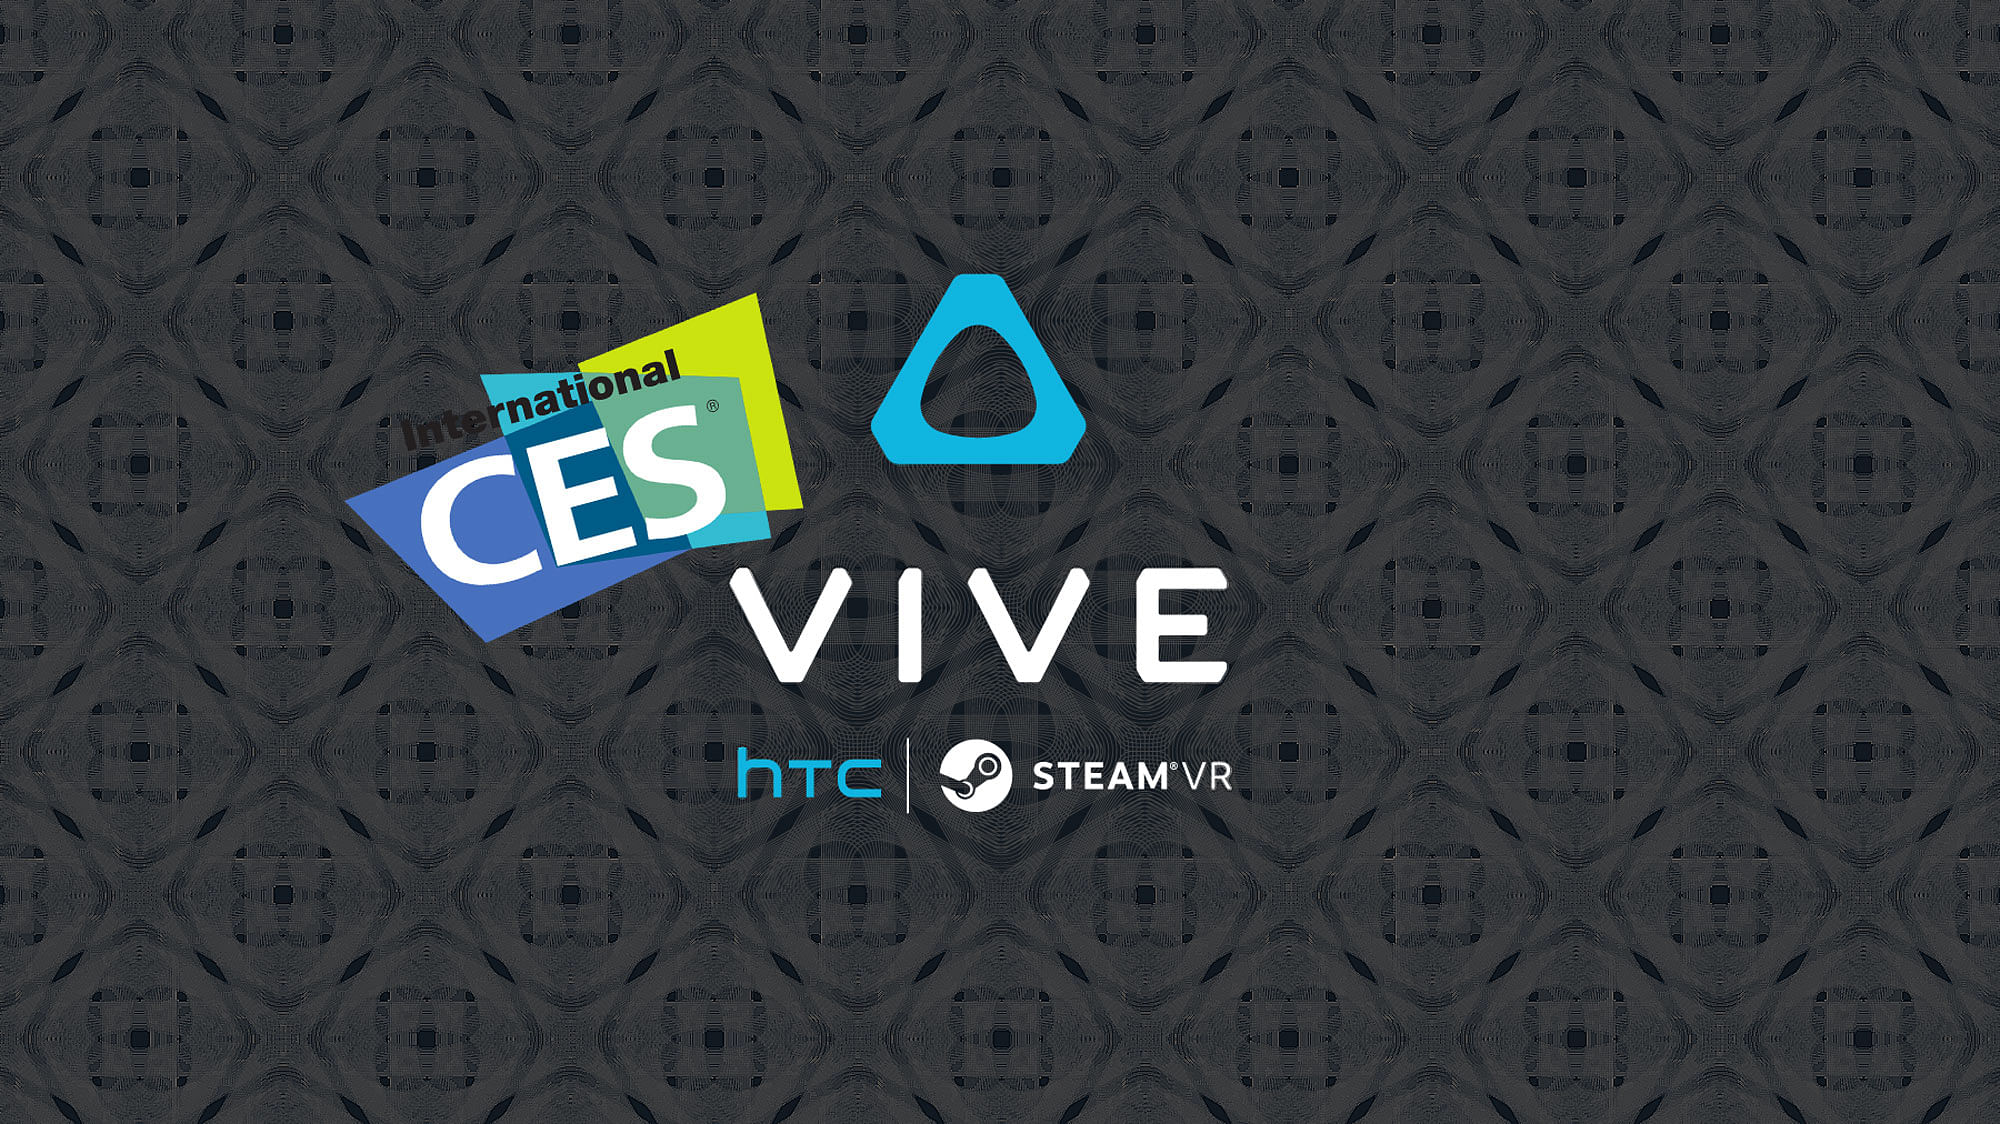 HTC Vive VR headset heads to CES 2016. (Photo Courtesy: <a href="http://blog.htcvive.com/2015/12/the-vive-heads-to-ces-2016/">HTC Vive</a>)